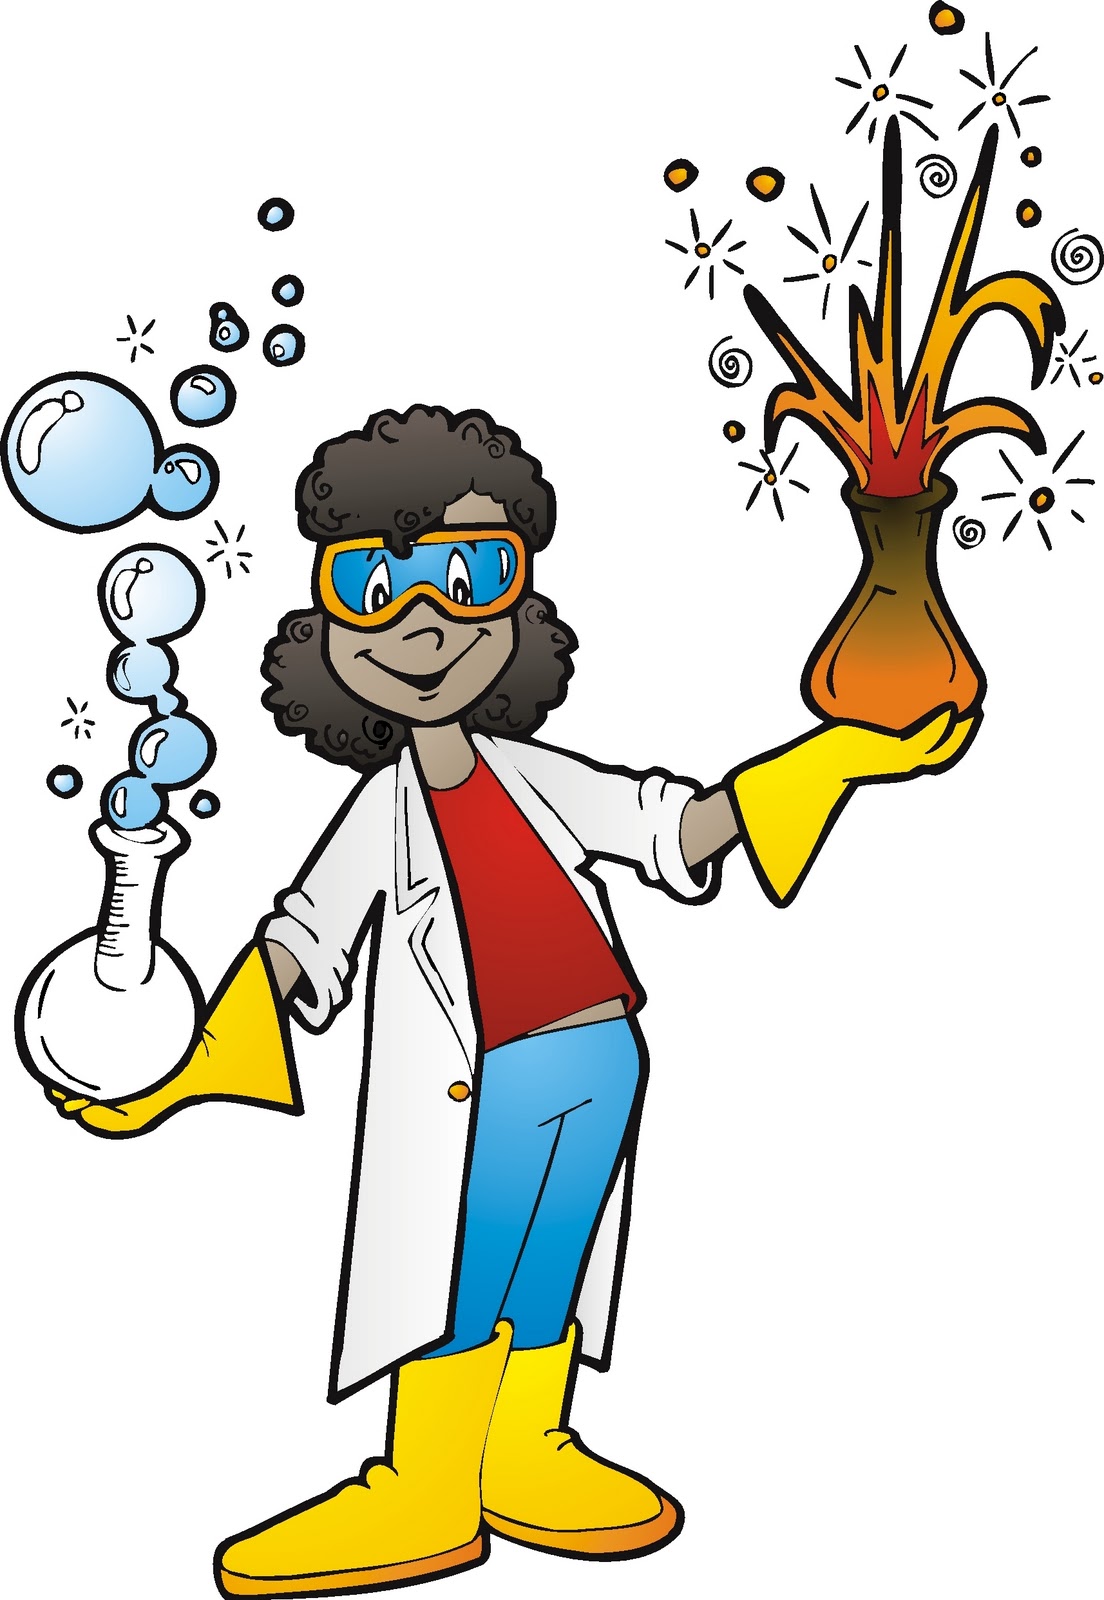 Science Cartoon Images - ClipArt Best